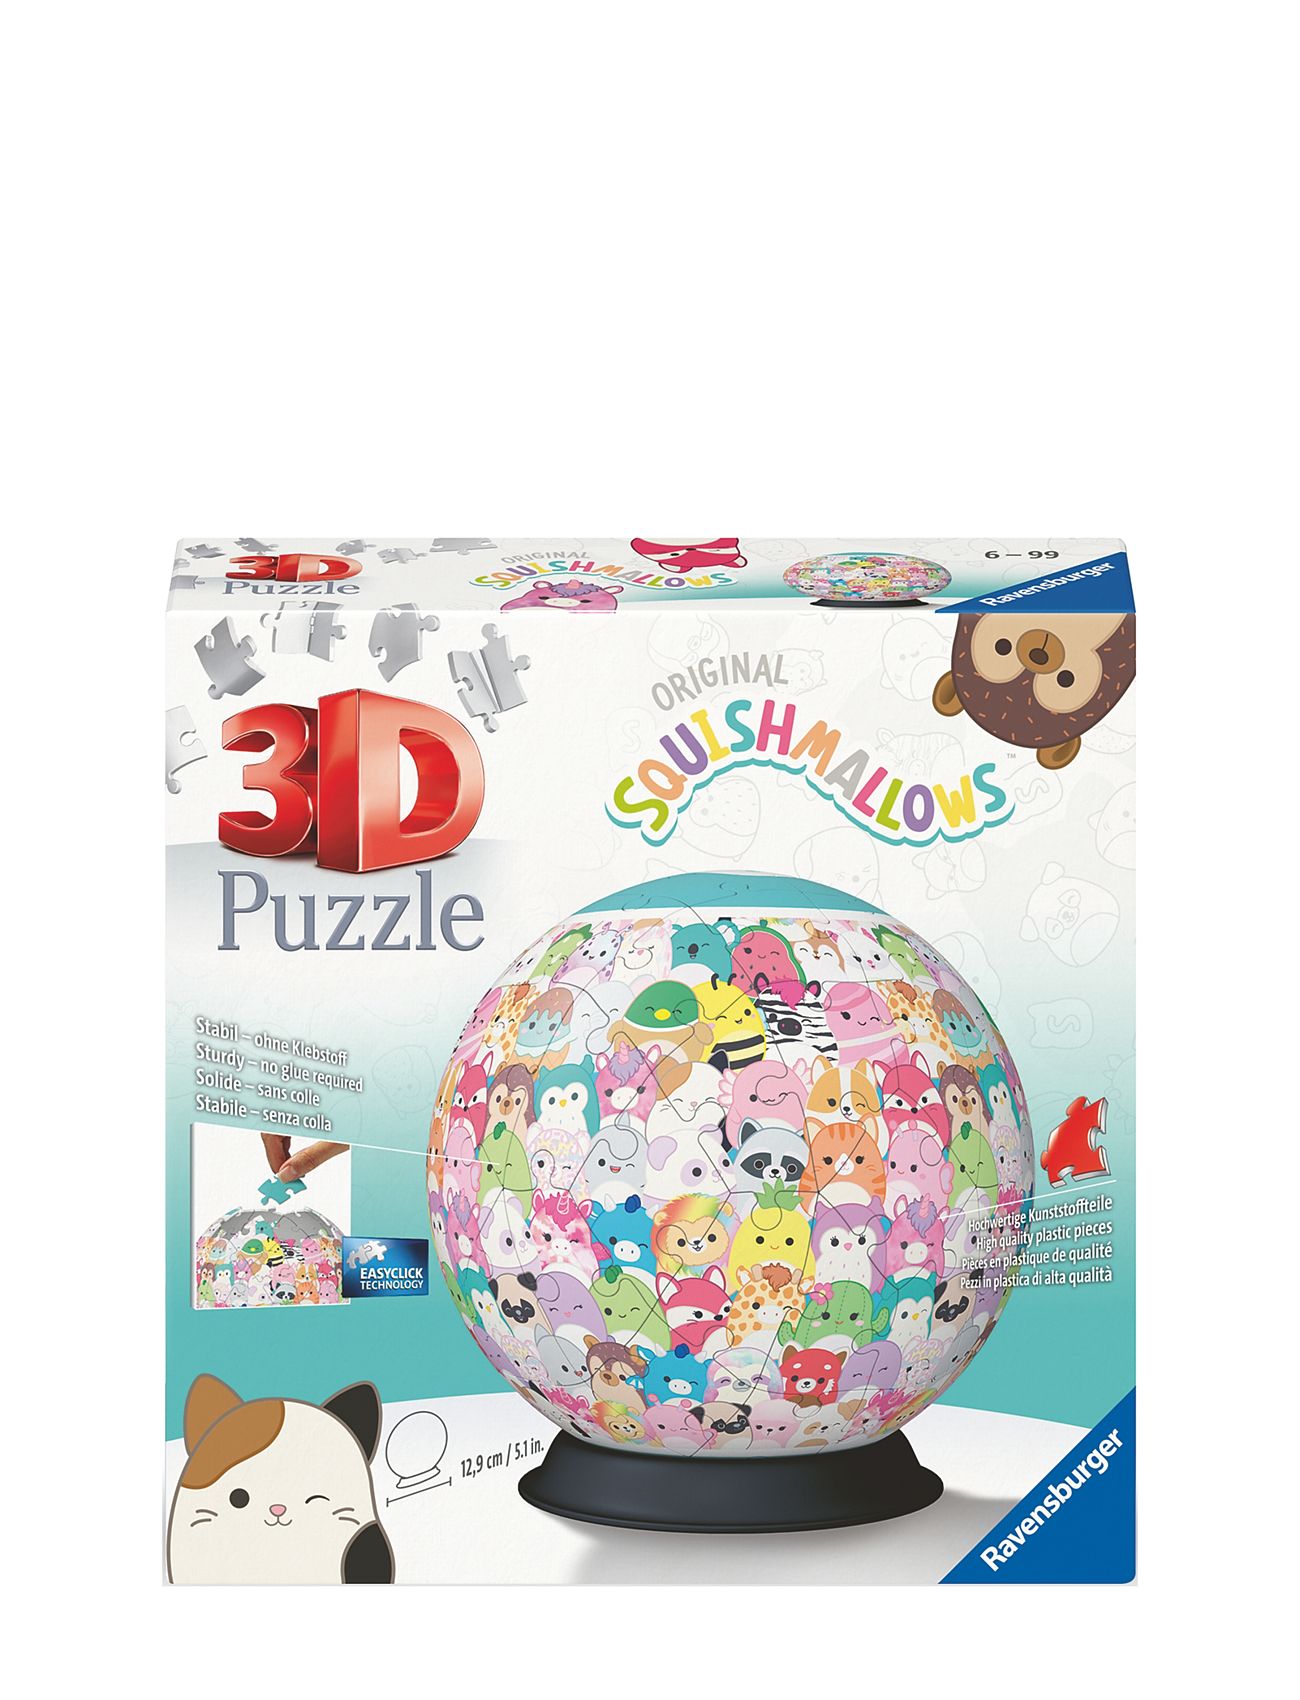 Squishmallows 3D Ball 72P Toys Puzzles And Games Puzzles 3d Puzzles Multi/patterned Ravensburger